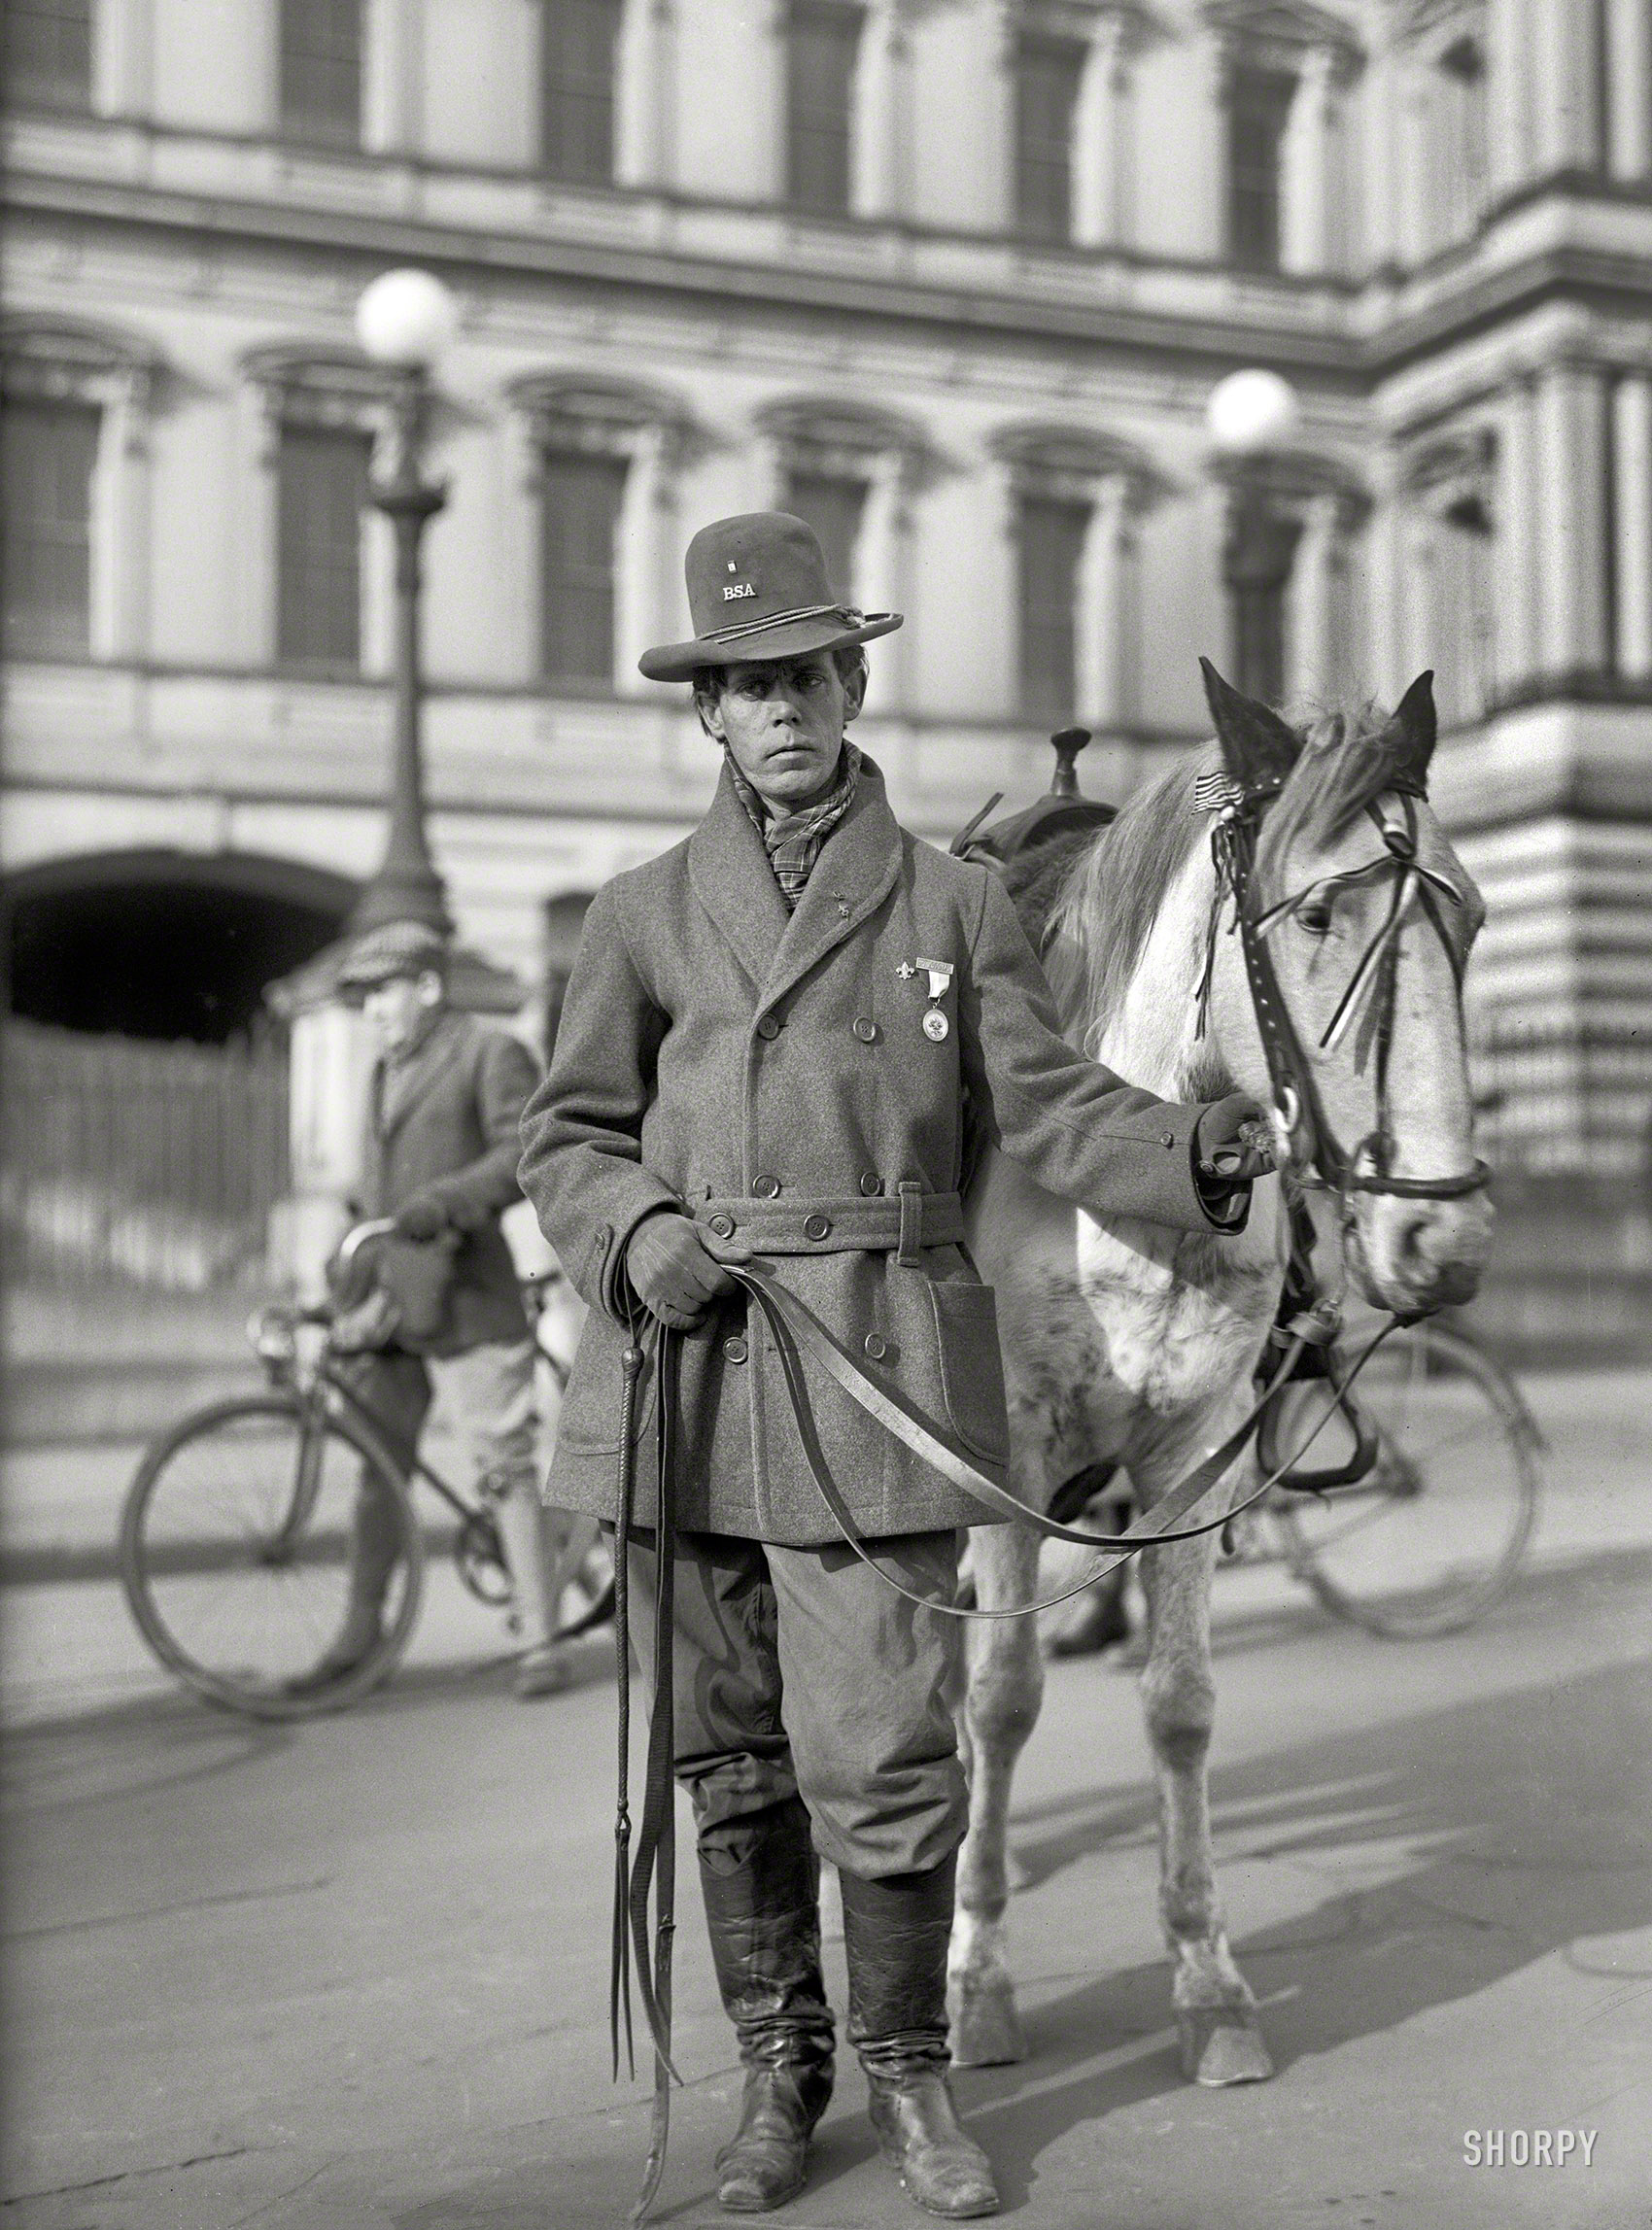 Red Fox James, a Blackfoot Indian, rode horseback from state to state seeking approval for a day to honor Indians. On Dec. 14, 1915, he presented the endorsements of 24 state governments at the White House. There is no record, however, of such a national day being proclaimed. (Library of Congress)

1915. "Indians, American. Red Fox James at White House." With the State, War and Navy building as backdrop. Harris & Ewing glass negative. View full size.